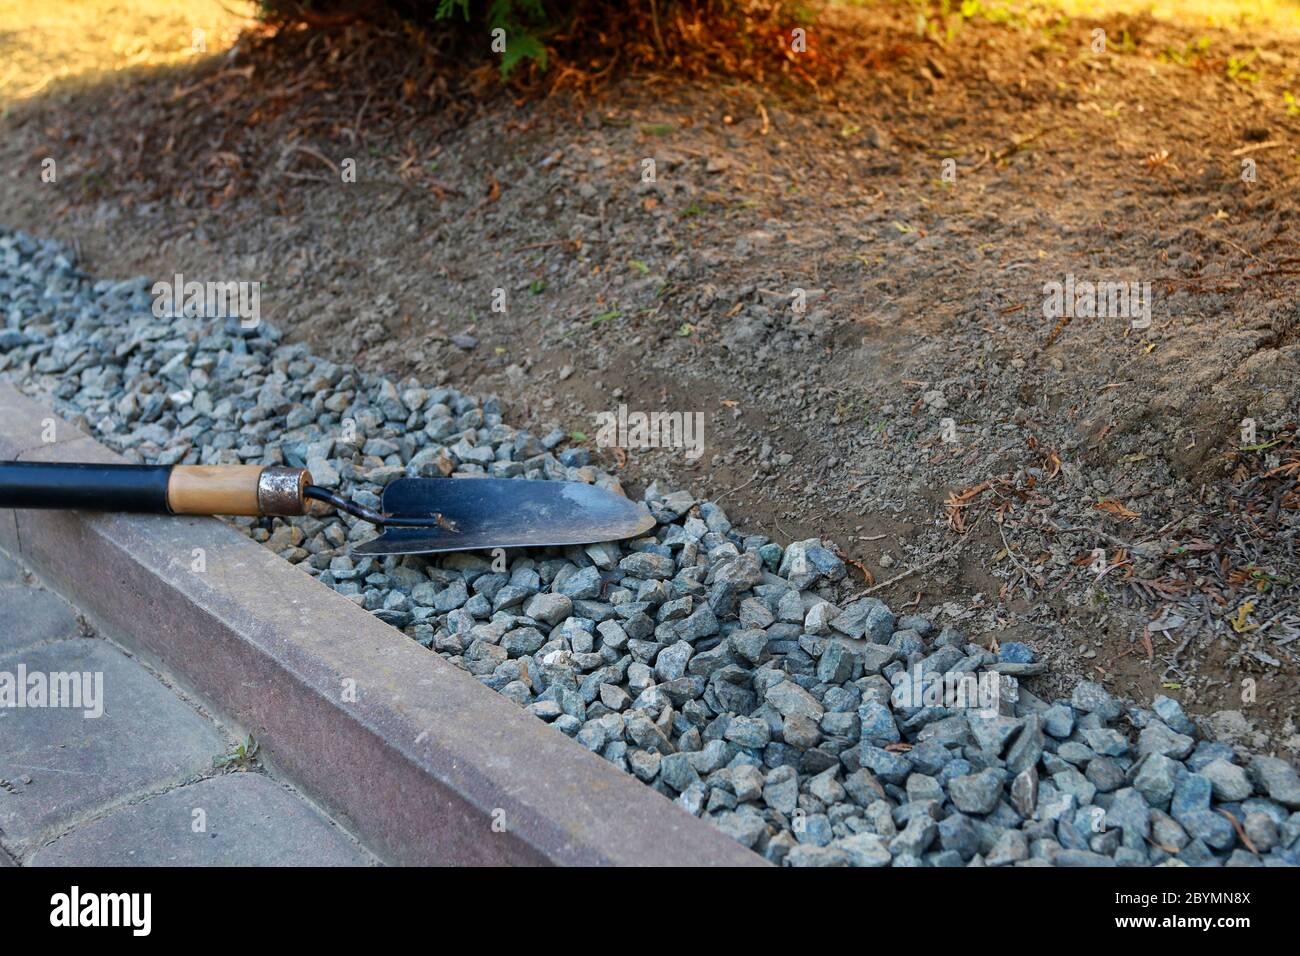 Gardener at work: How to make a decoration from small pebbles next to a path in the garden. Stock Photo